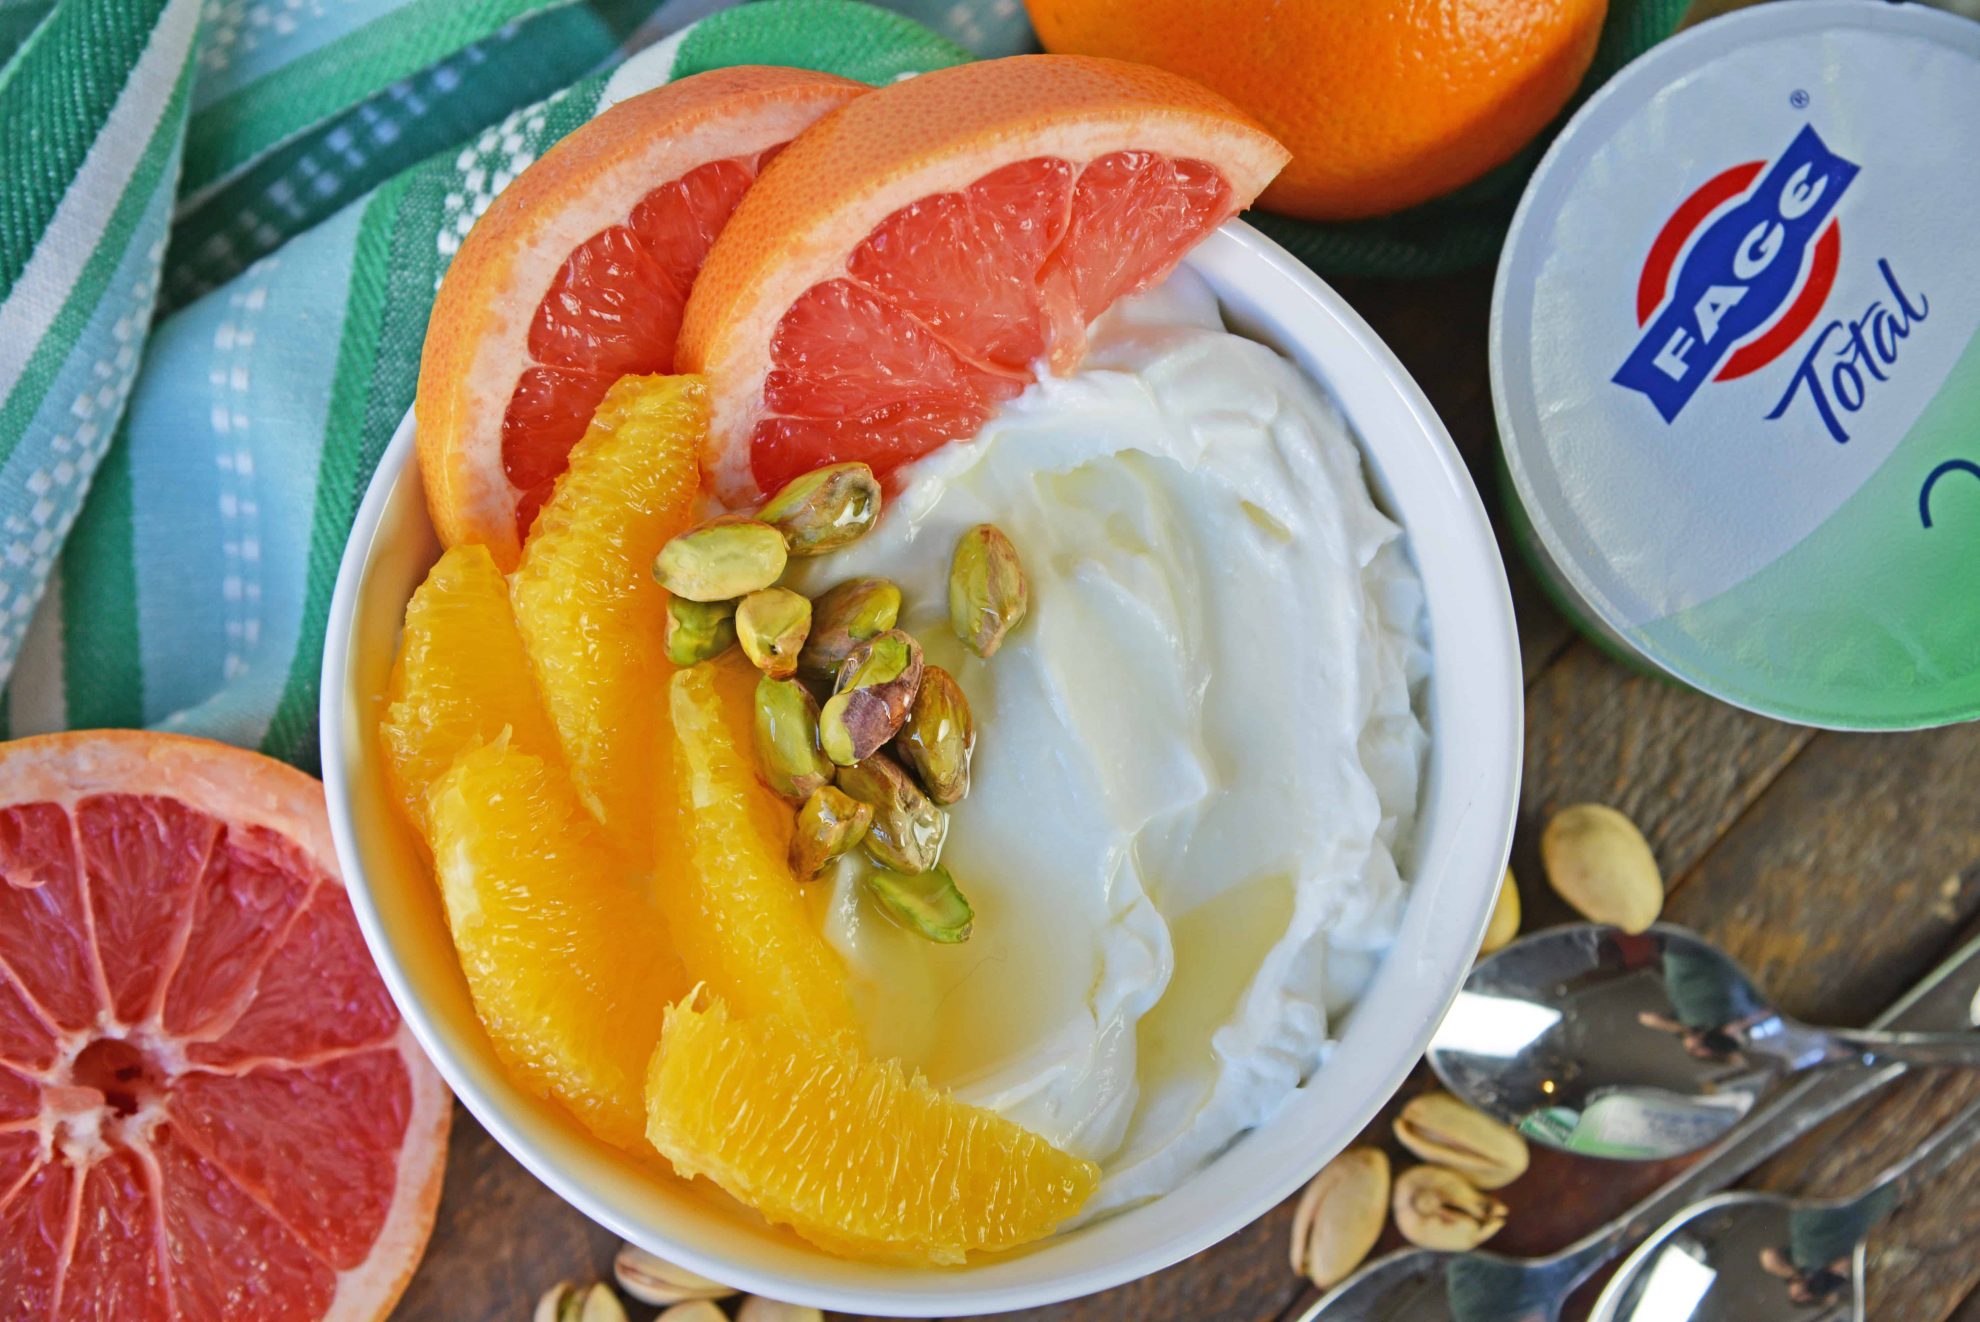 Discover 5 unique yogurt bowls using fresh fruit, natural sweeteners and nuts to help keep you on track for a healthy lifestyle while still feeling satisfied. #yogurtbowls www.savoryexperiments.com 